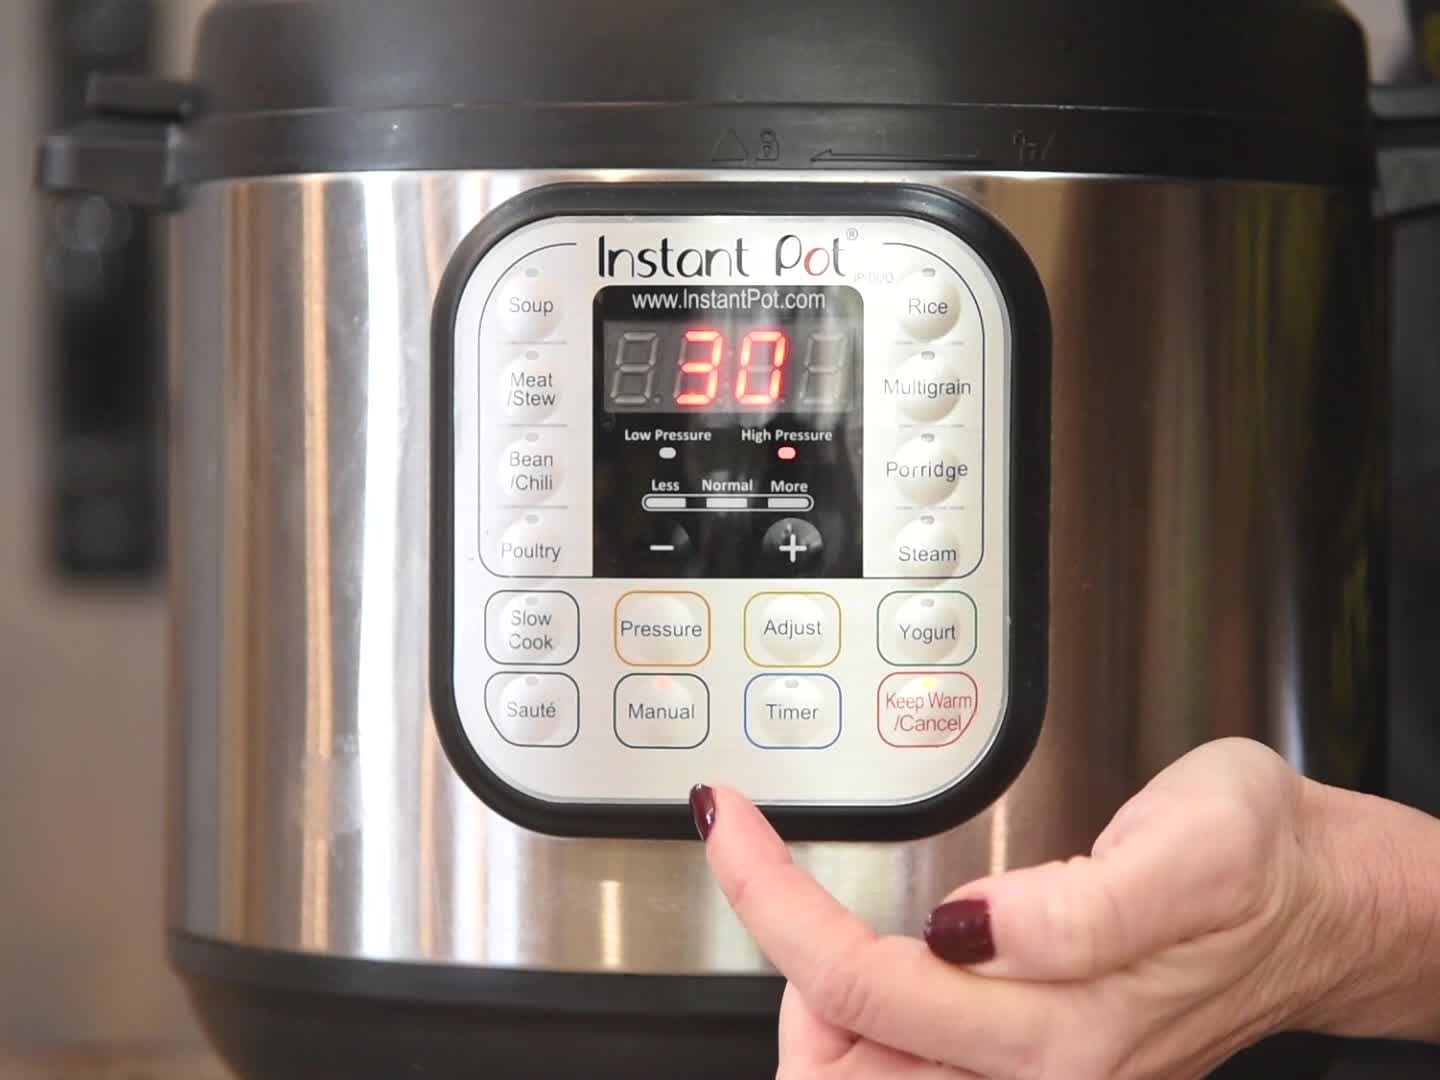 3 Ways to Use an Instant Pot - wikiHow Life